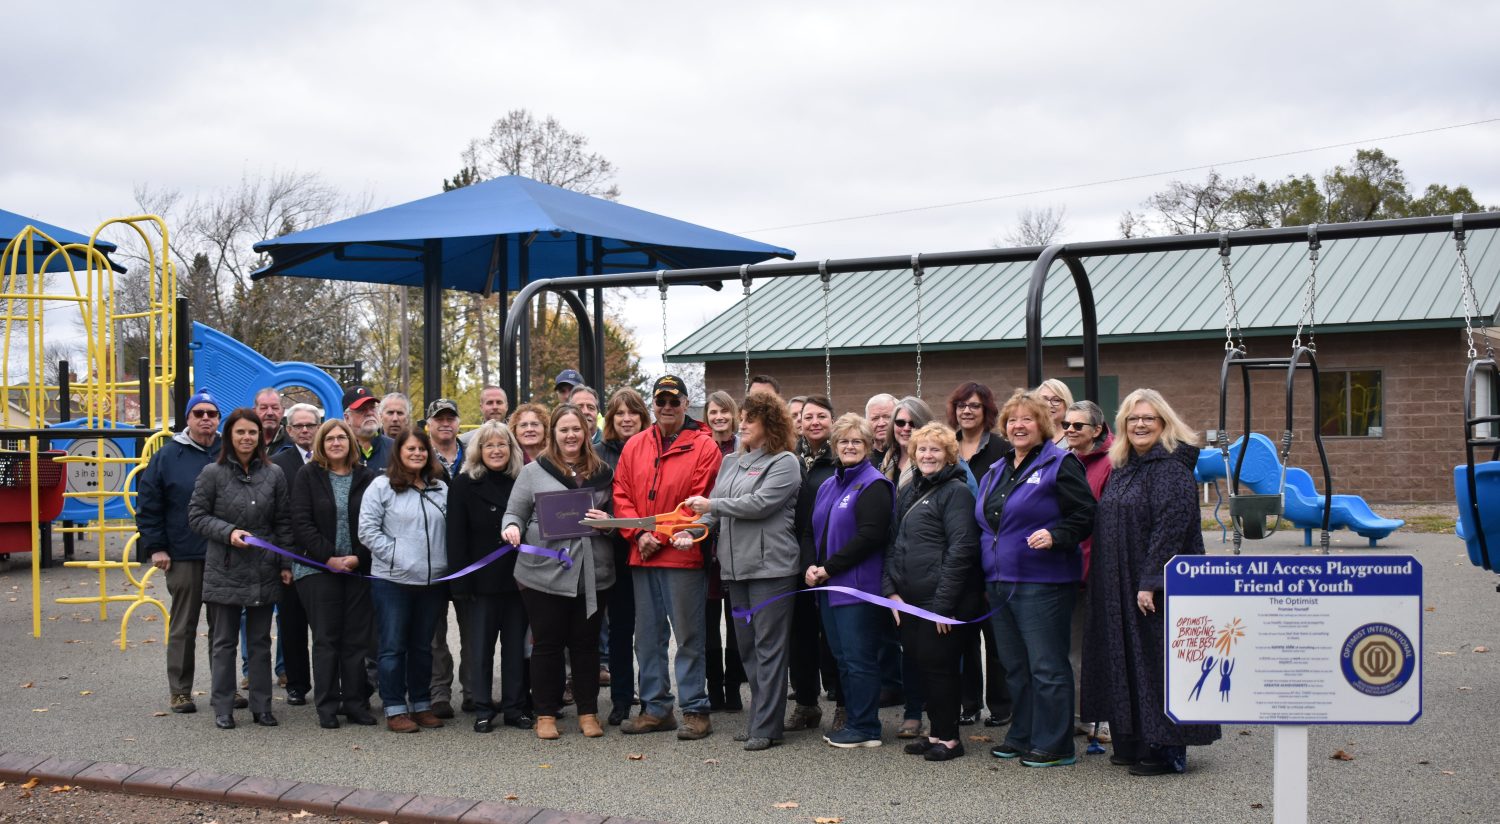 Optimist Club celebrates opening of new All-Access Playground